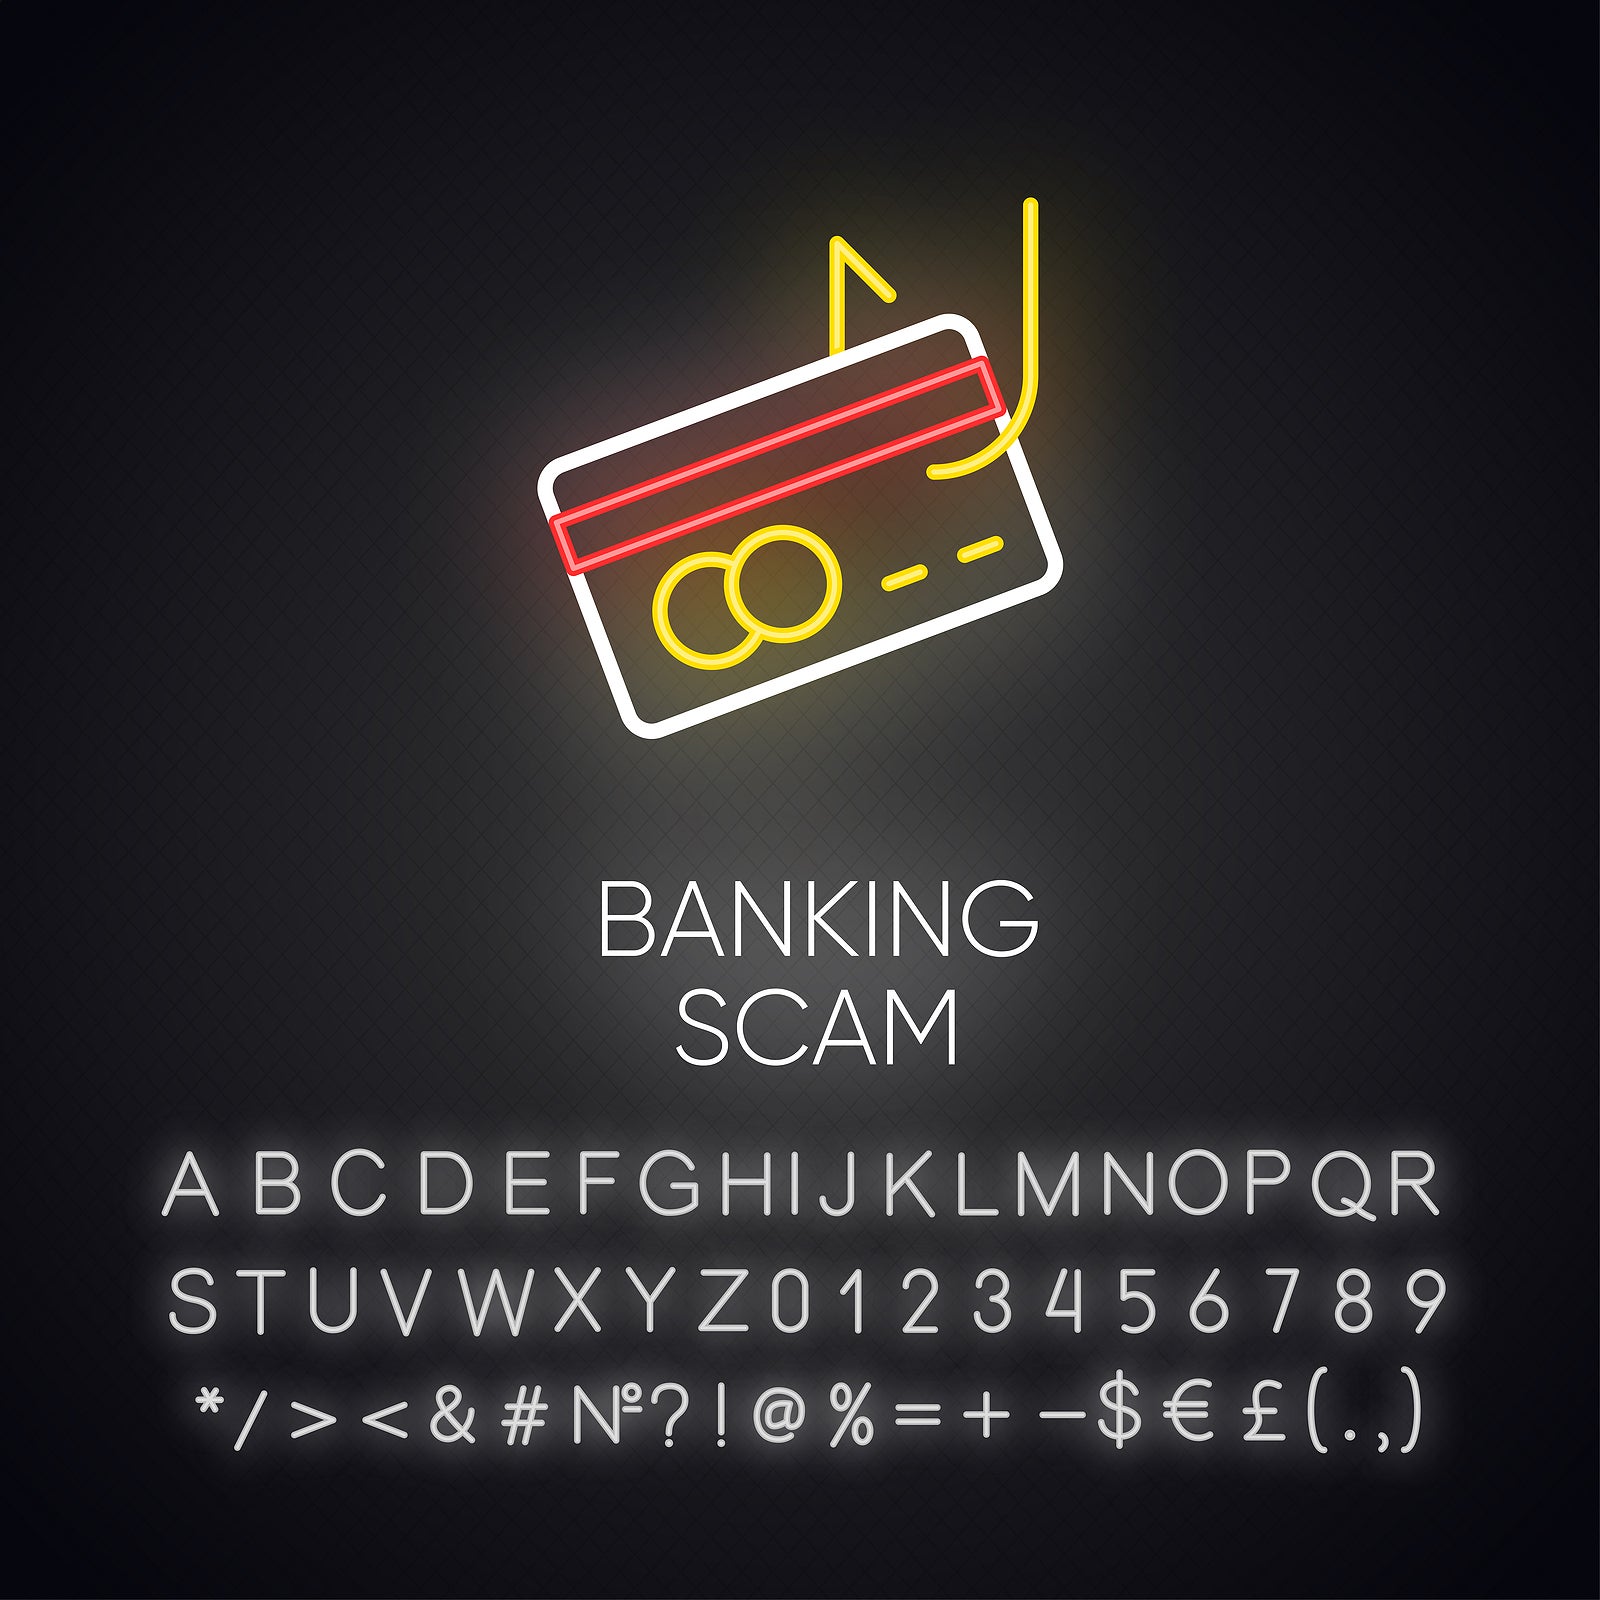 Banking scam neon light icon. Skimming. Identity theft. Credit card phishing. Financial fraud. Fake loan offer. Glowing sign with alphabet, numbers and symbols. Vector isolated illustration